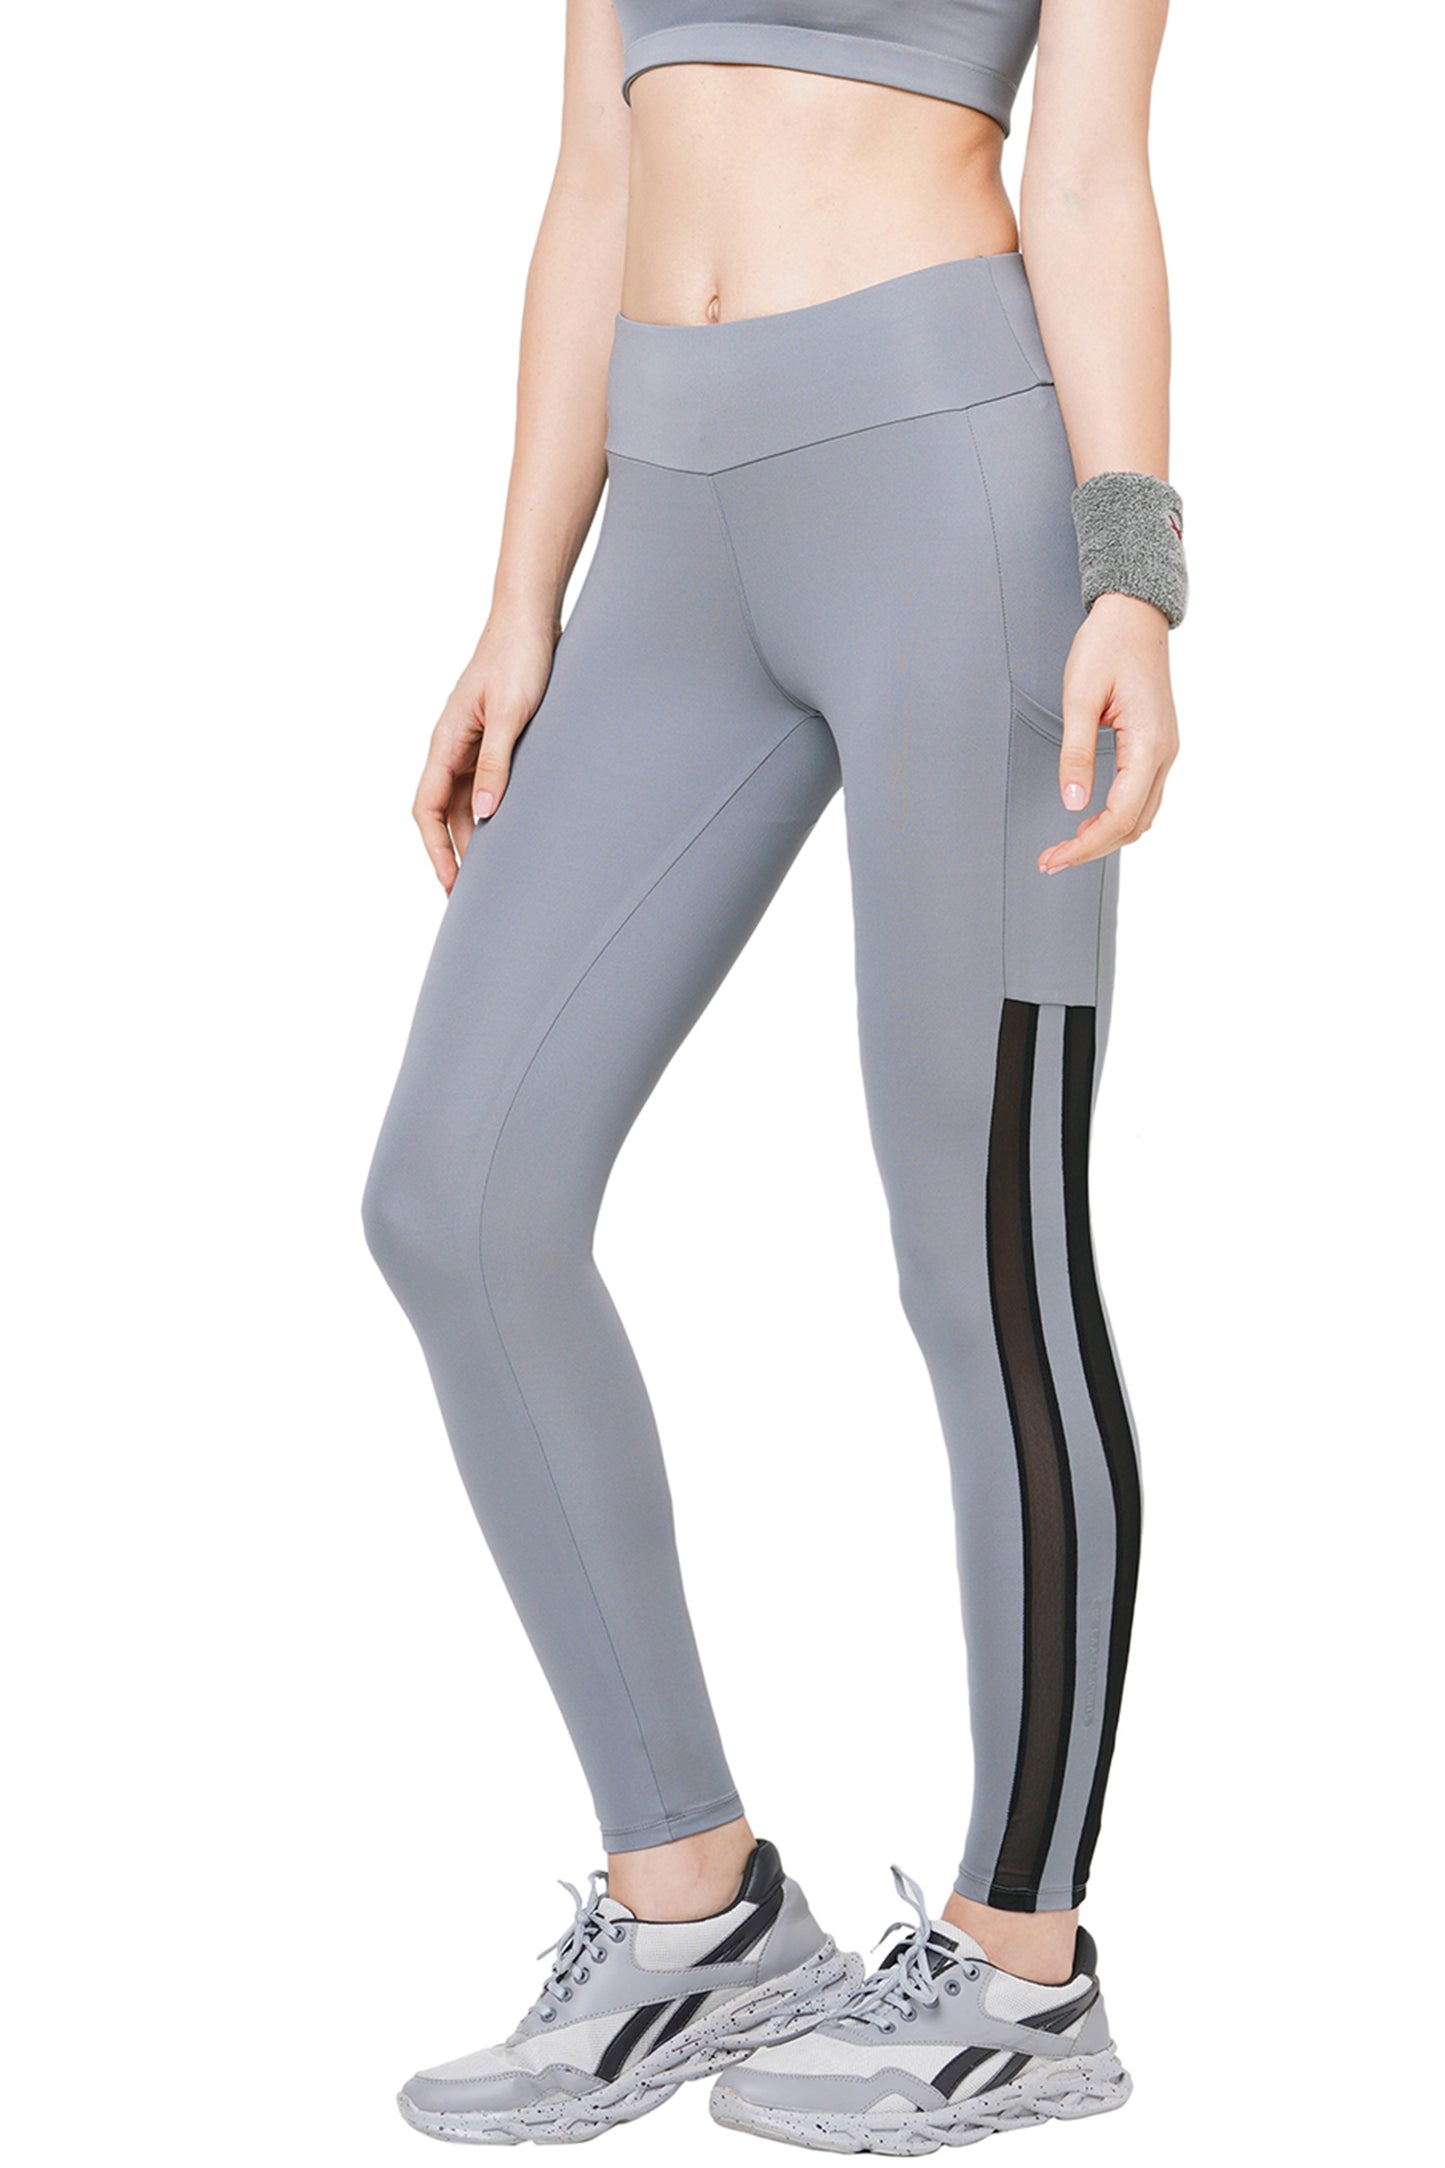 JUST-DRY MESH PANEL 7/8 GO TRAIN TIGHTS